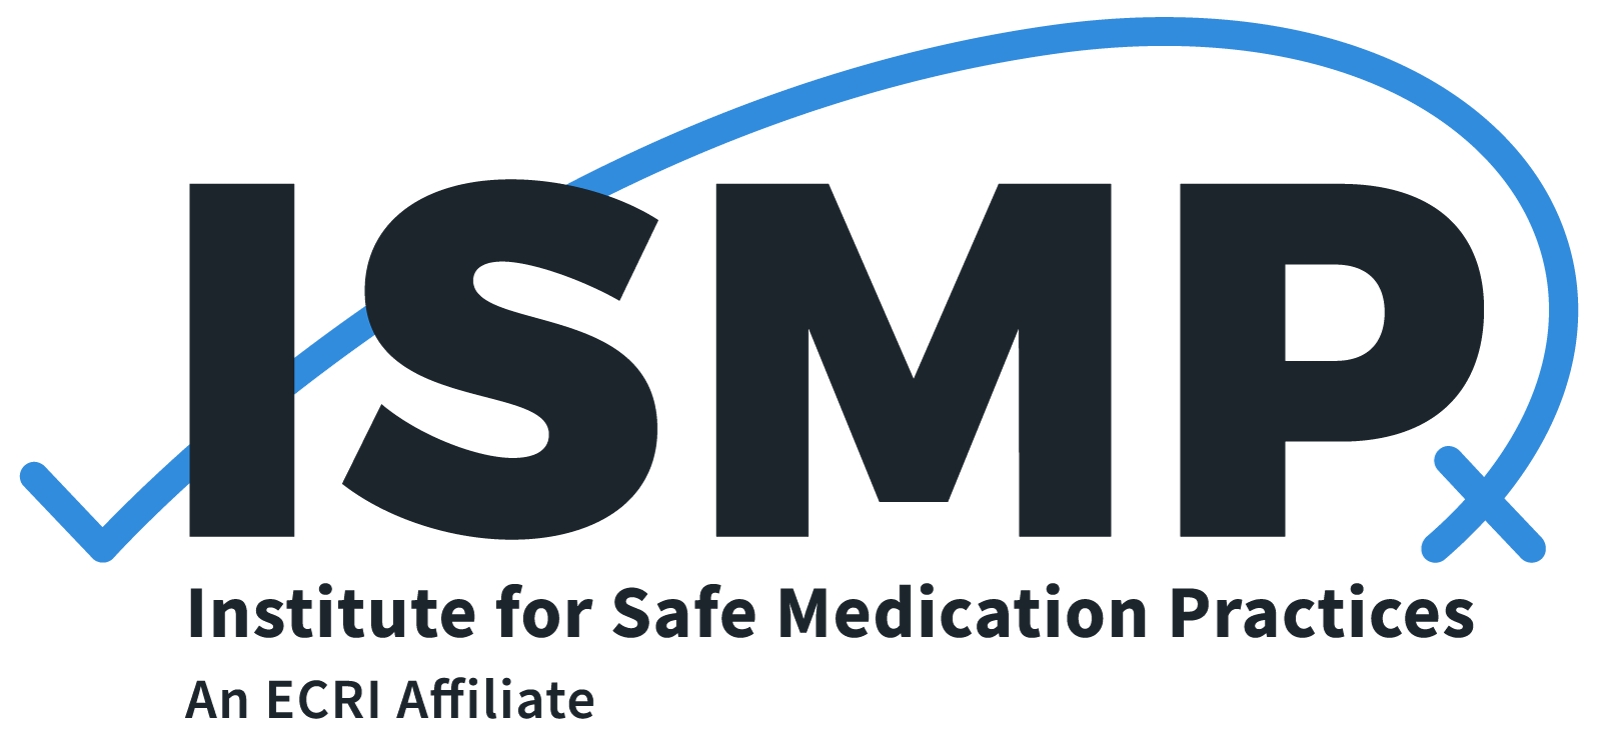 Thank you for your application! Institute For Safe Medication Practices